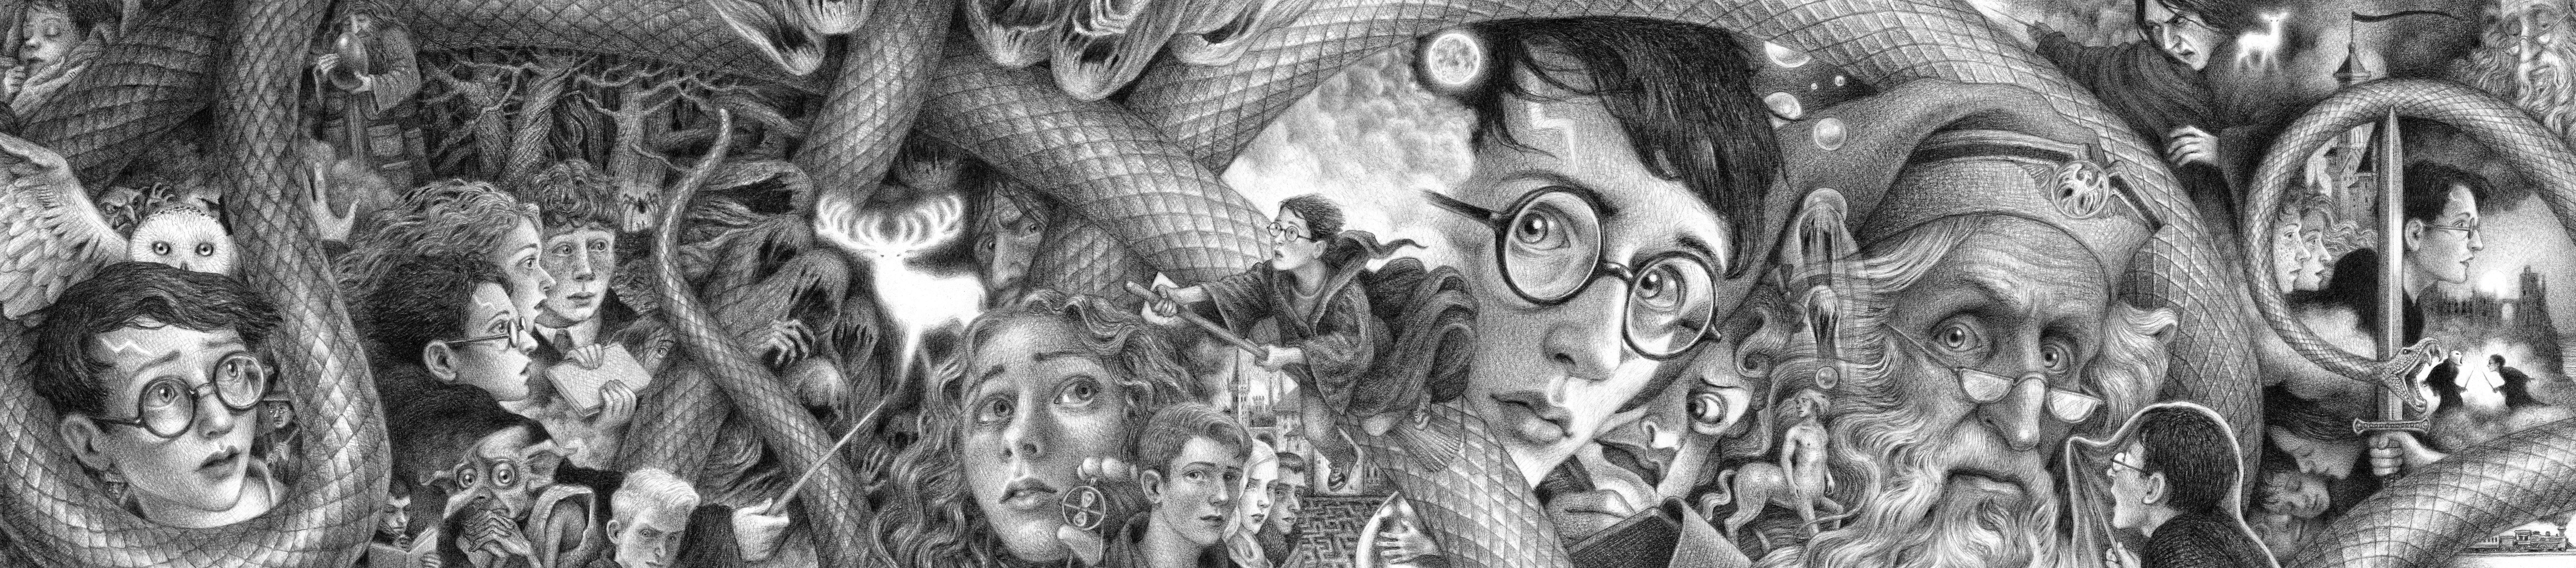 The Newest 'Harry Potter' Book Covers Are Beautifully Detailed